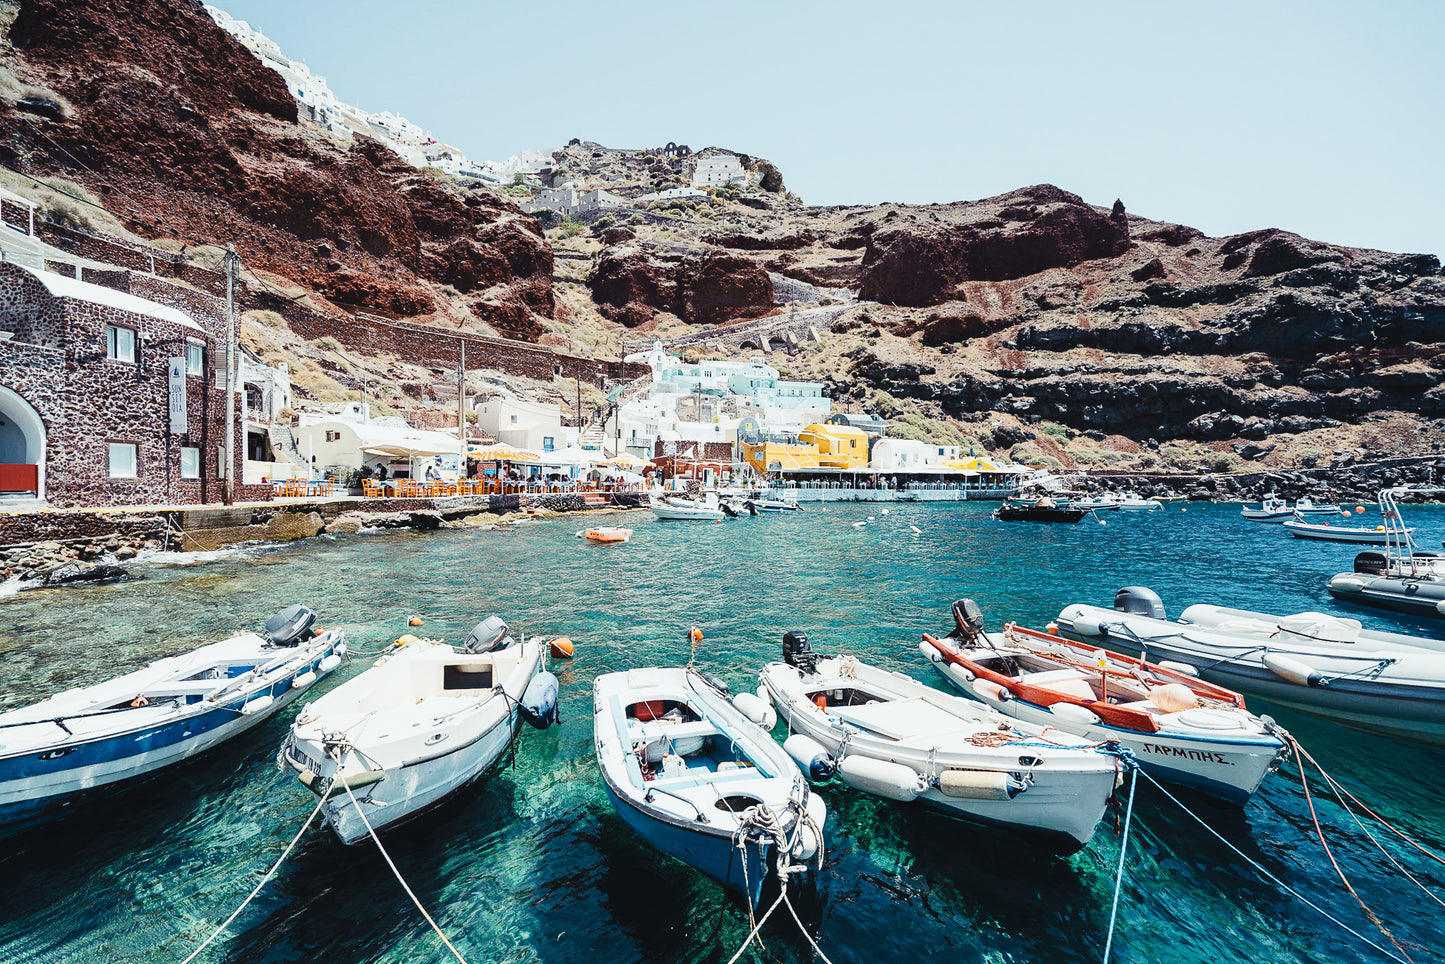 Amoudi Bay is the old port of Santorini below Oia. A tiny fishing village with a rocky beach, waterside tavernas, cliff jumping & sunsets.